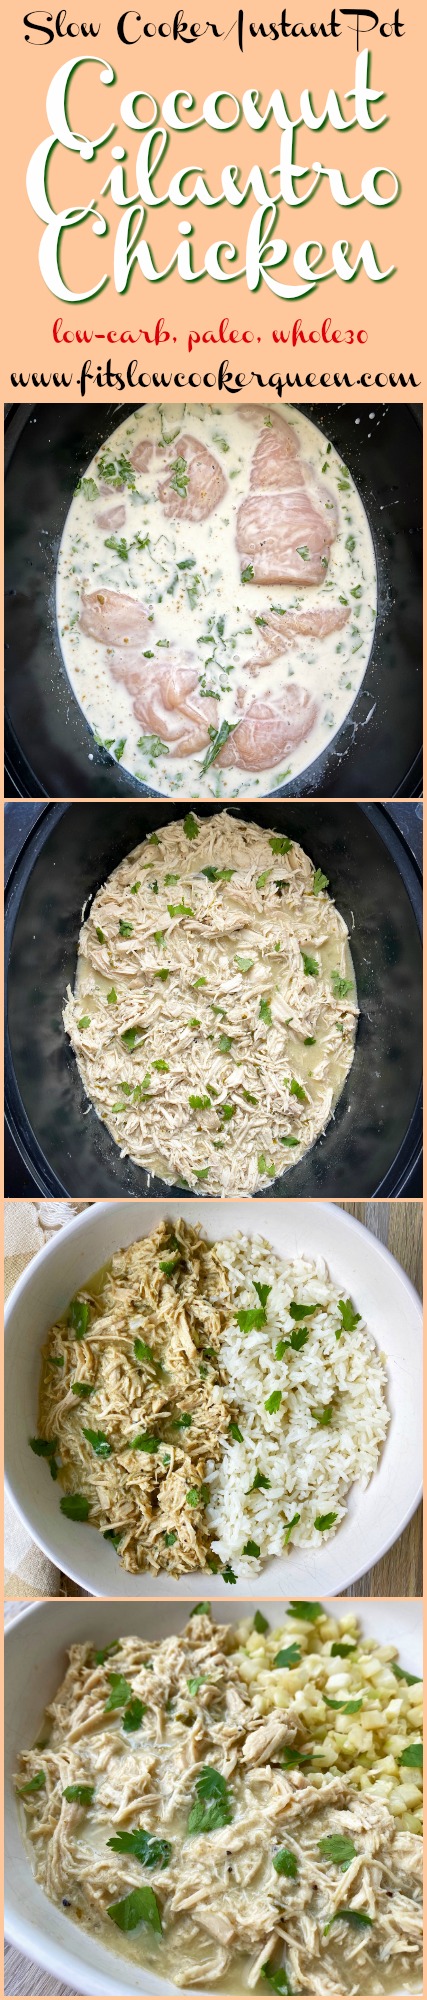 another pinterest pin for Slow Cooker Coconut Cilantro Chicken (Low-Carb, Paleo, Whole30)